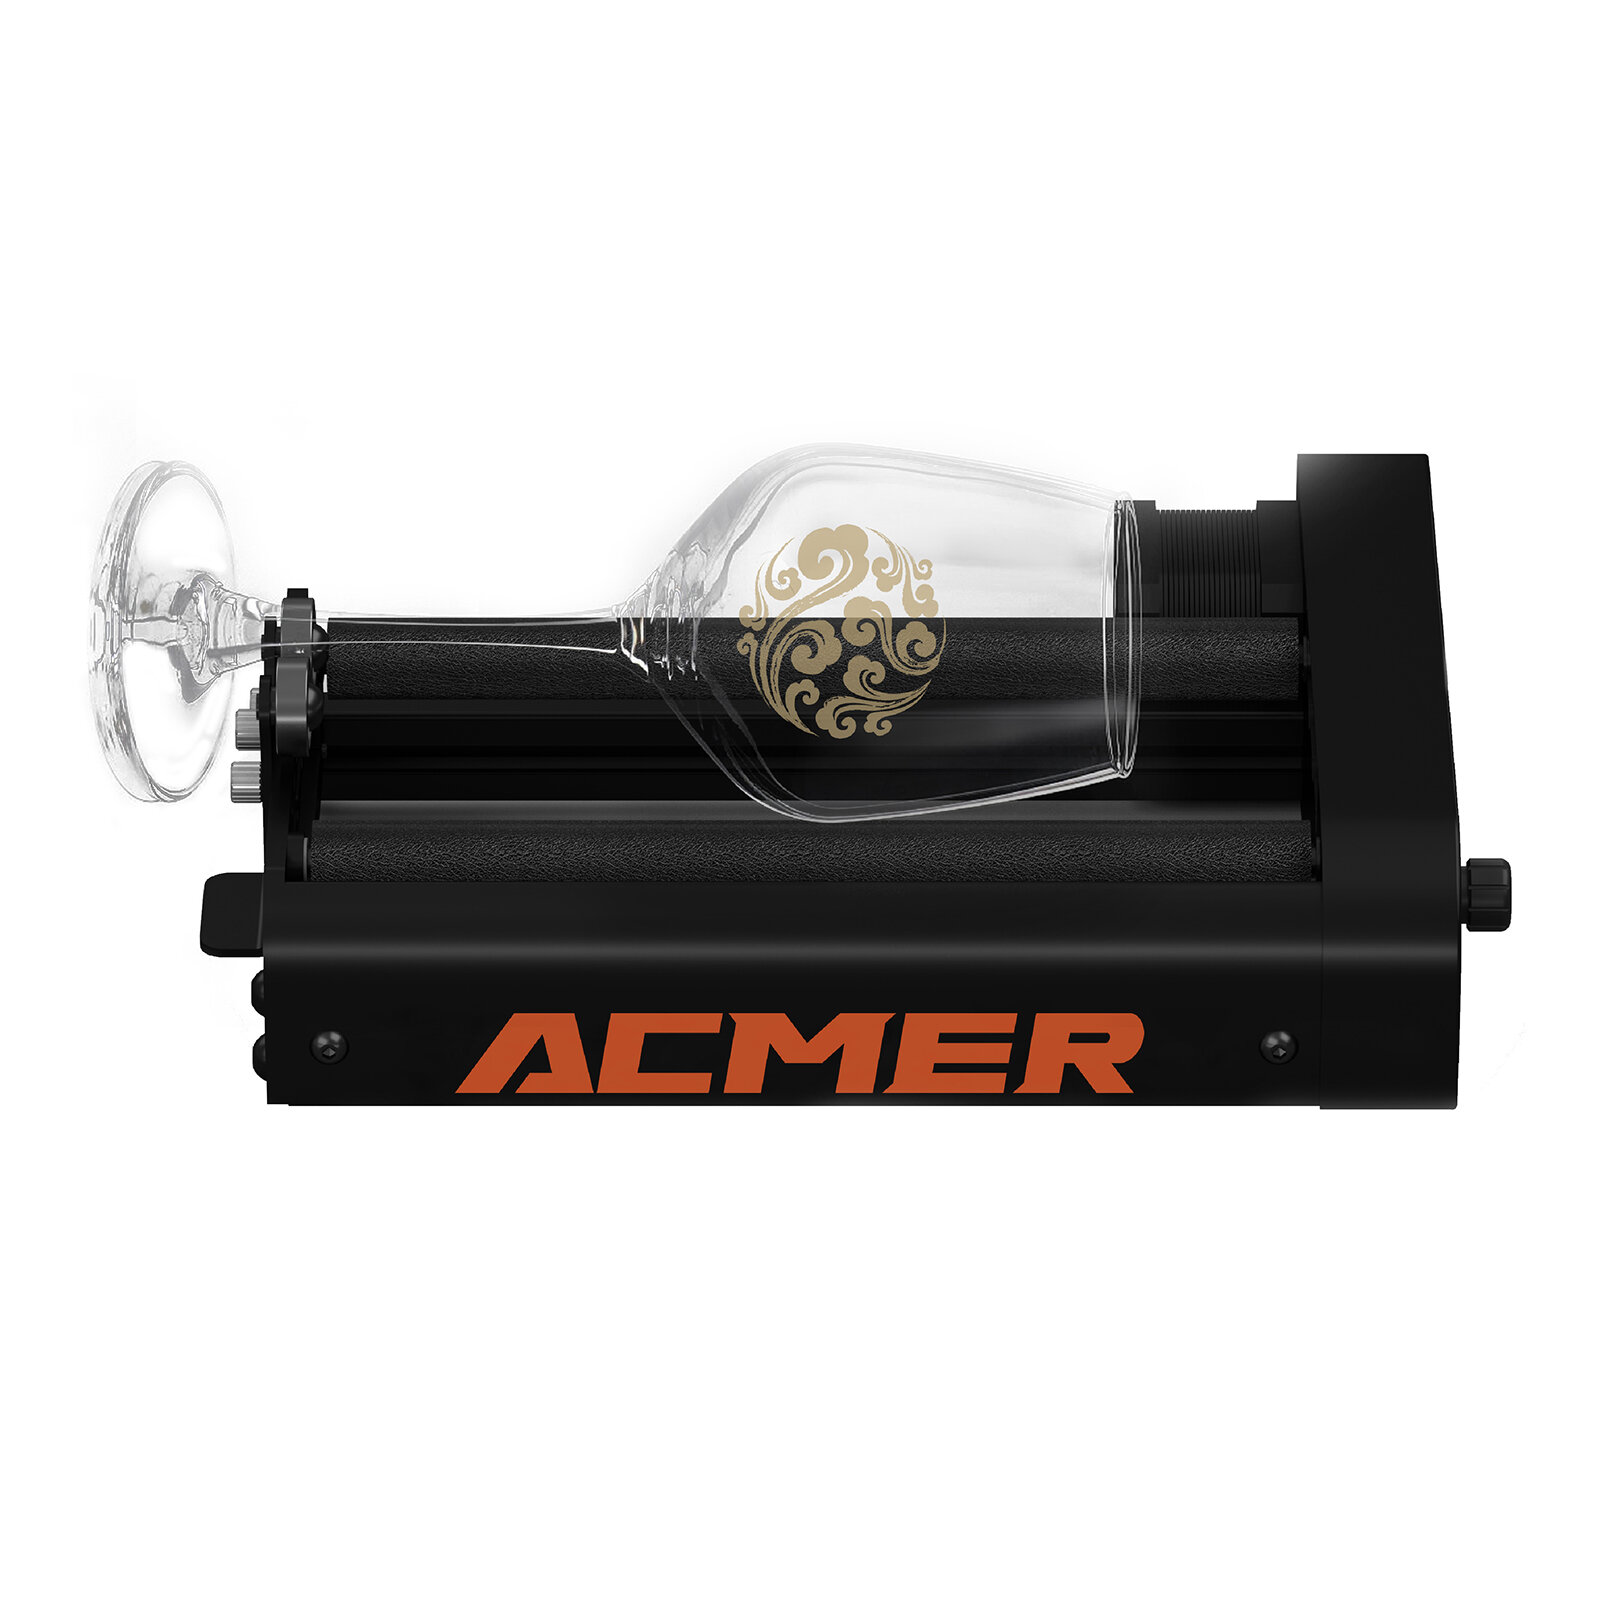 

[EU/US Direct] ACMER M1 Laser Engraver Roller for Cylindrical Objects with 360° Rotating Engraving Axis 4 Level Adjustme